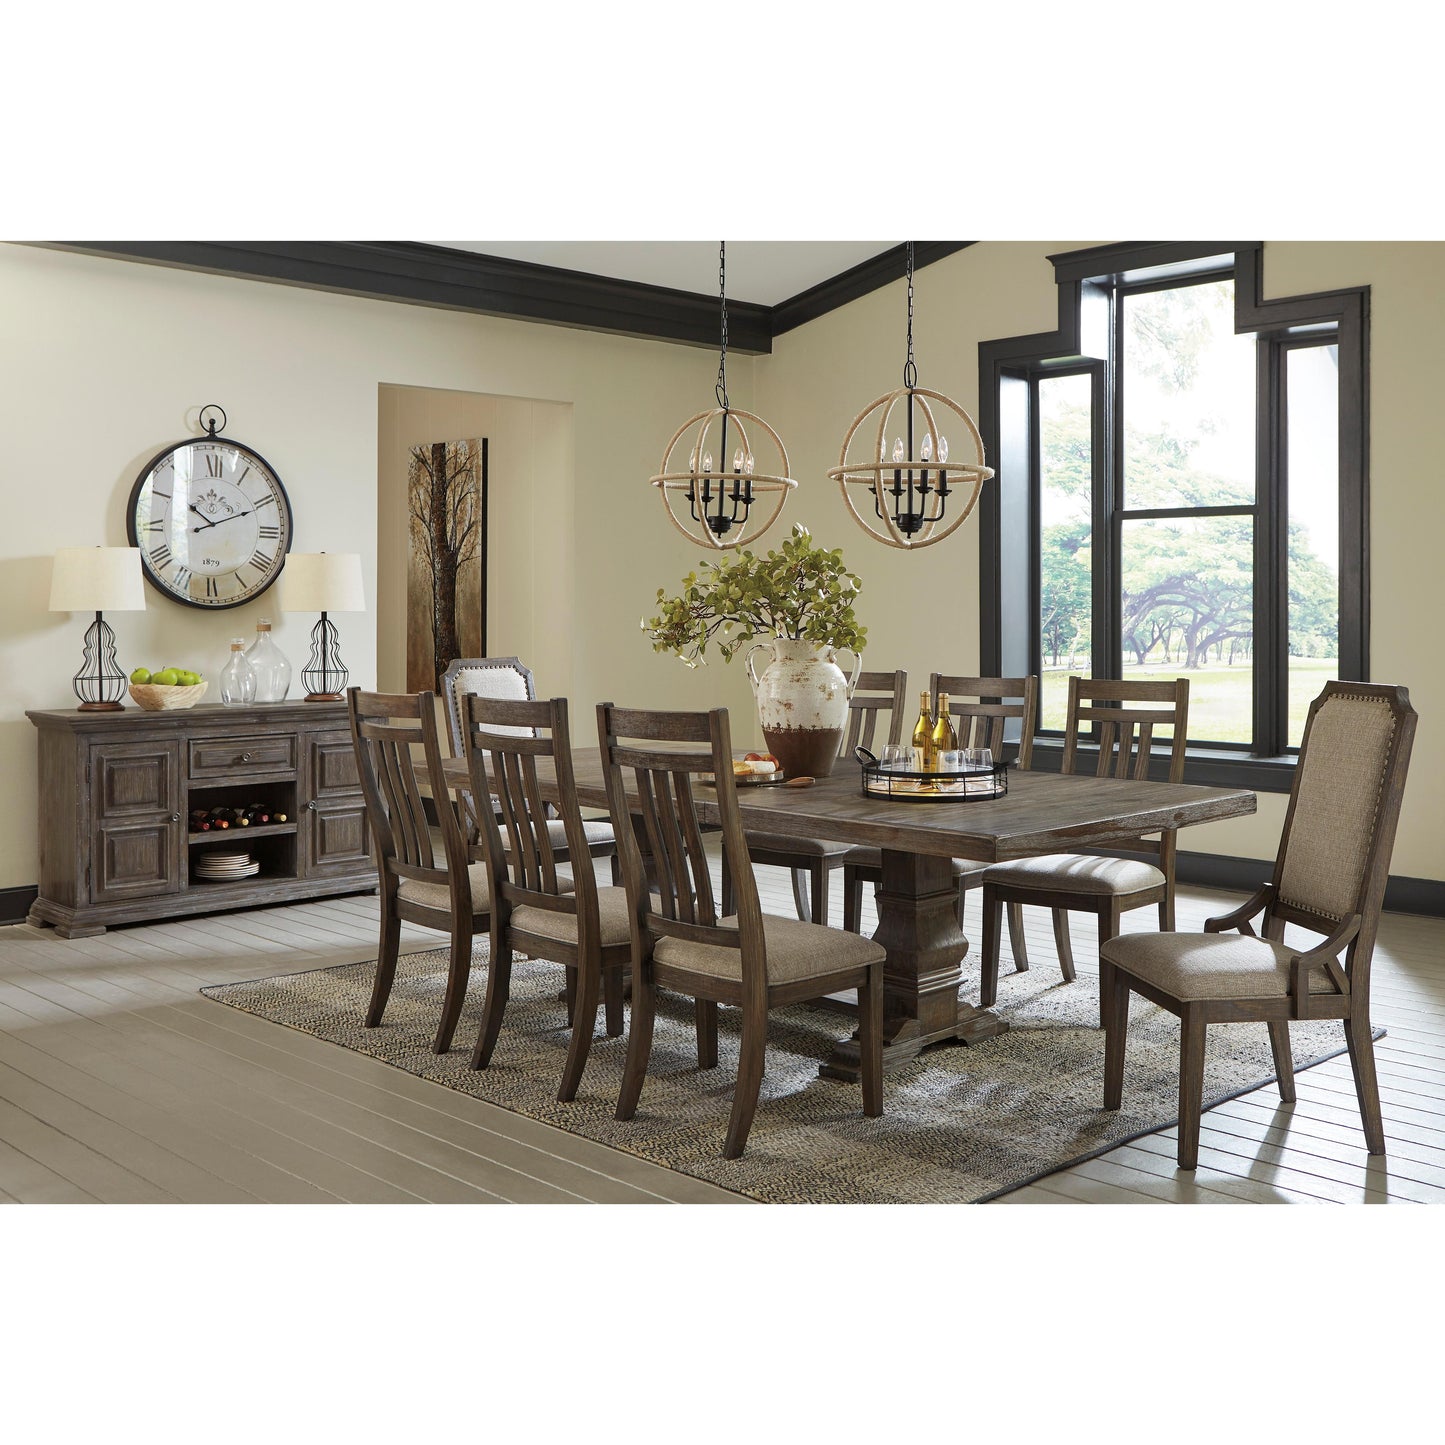 Signature Design by Ashley Wyndahl Dining table with Trestle Base D813-55T/D813-55B